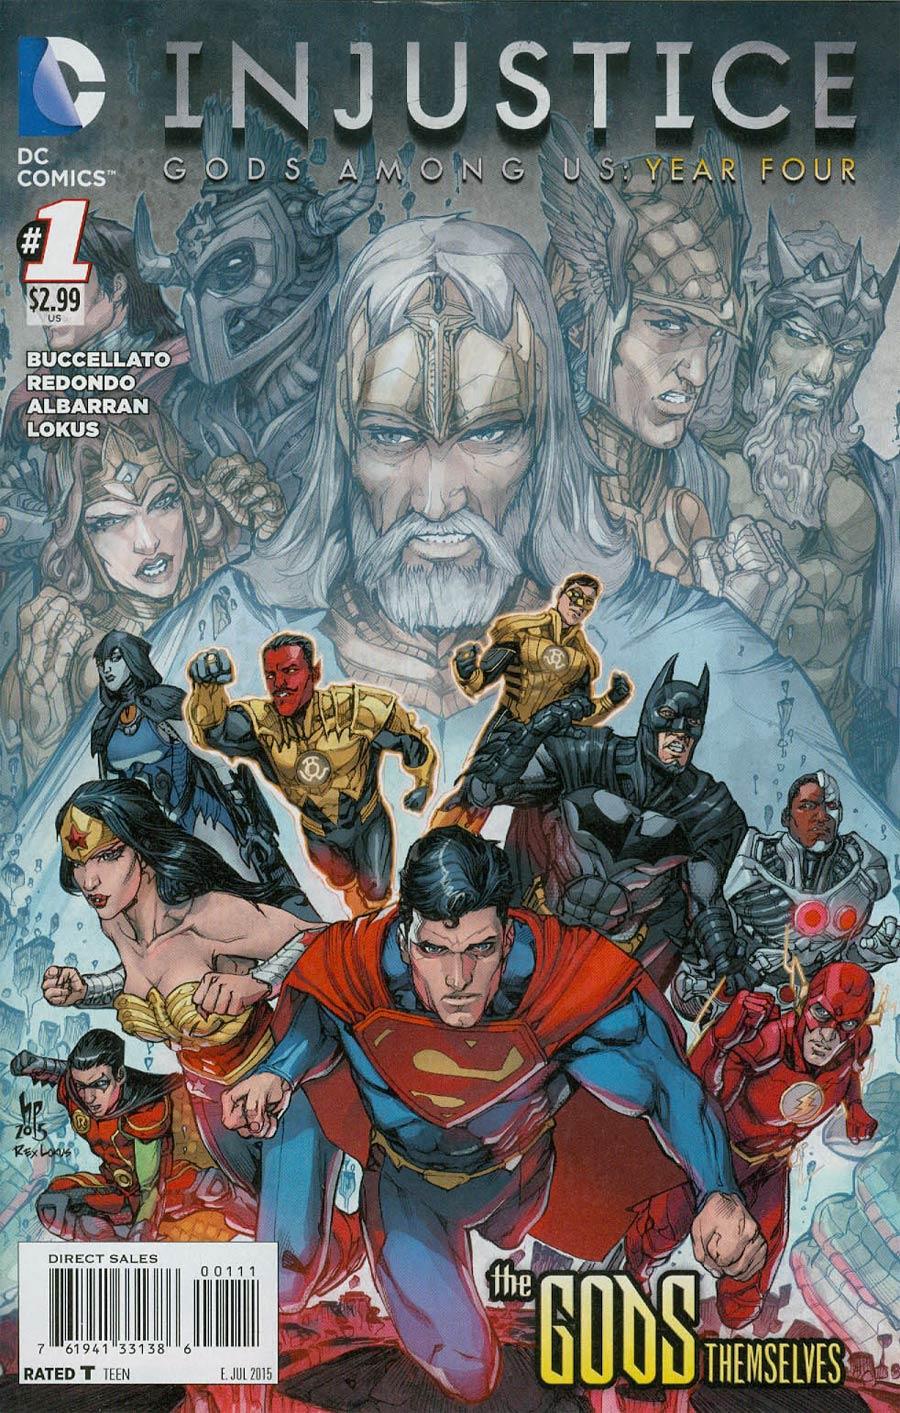 Injustice: Gods Among Us: Year Four Vol. 1 #1